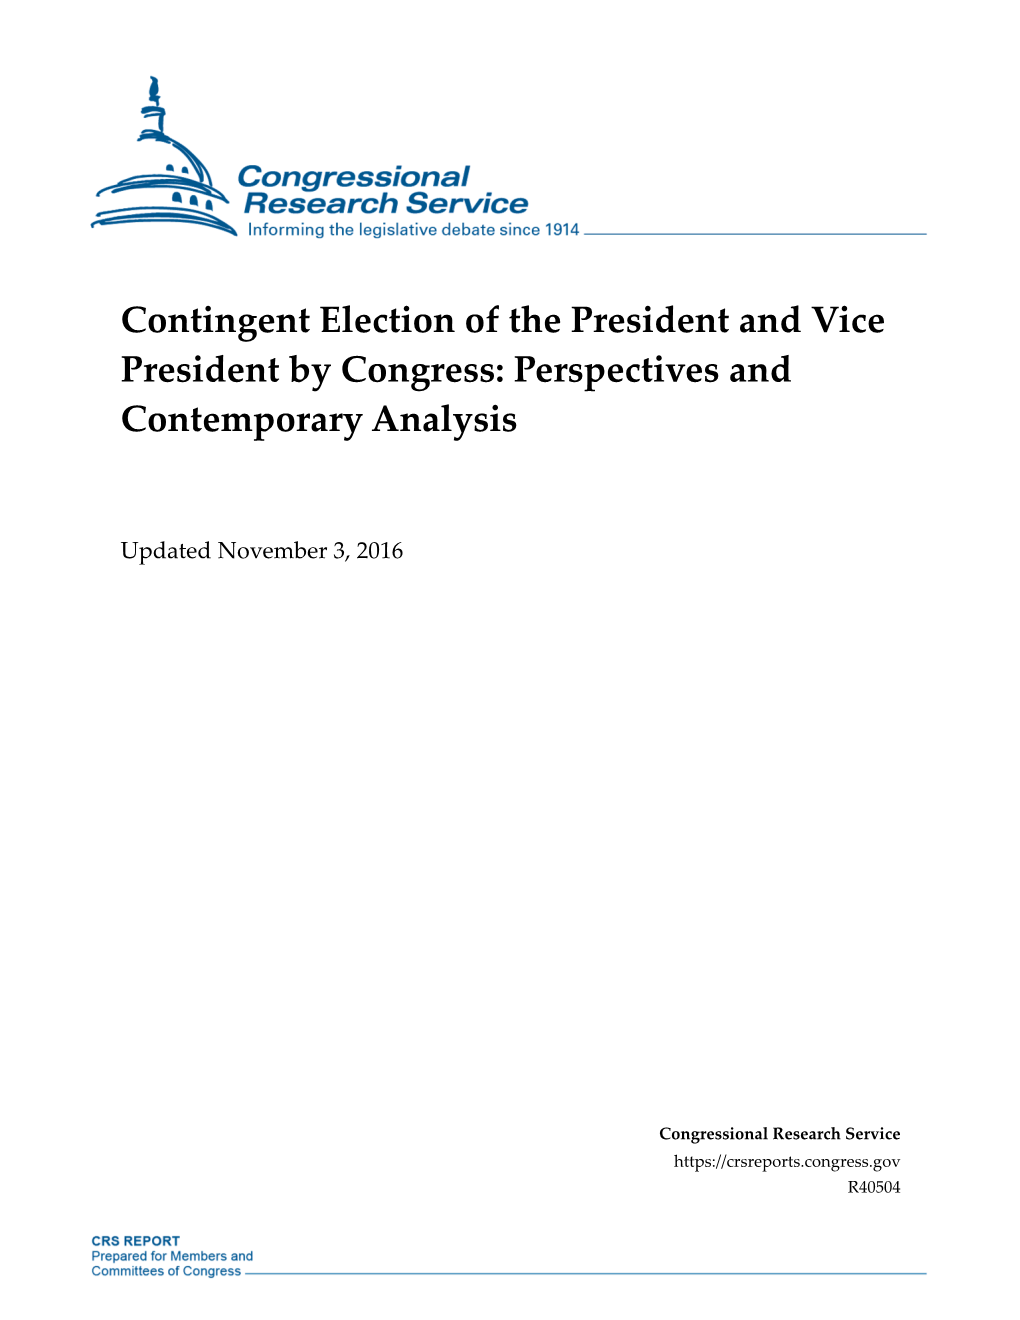 Contingent Election of the President and Vice President by Congress: Perspectives and Contemporary Analysis